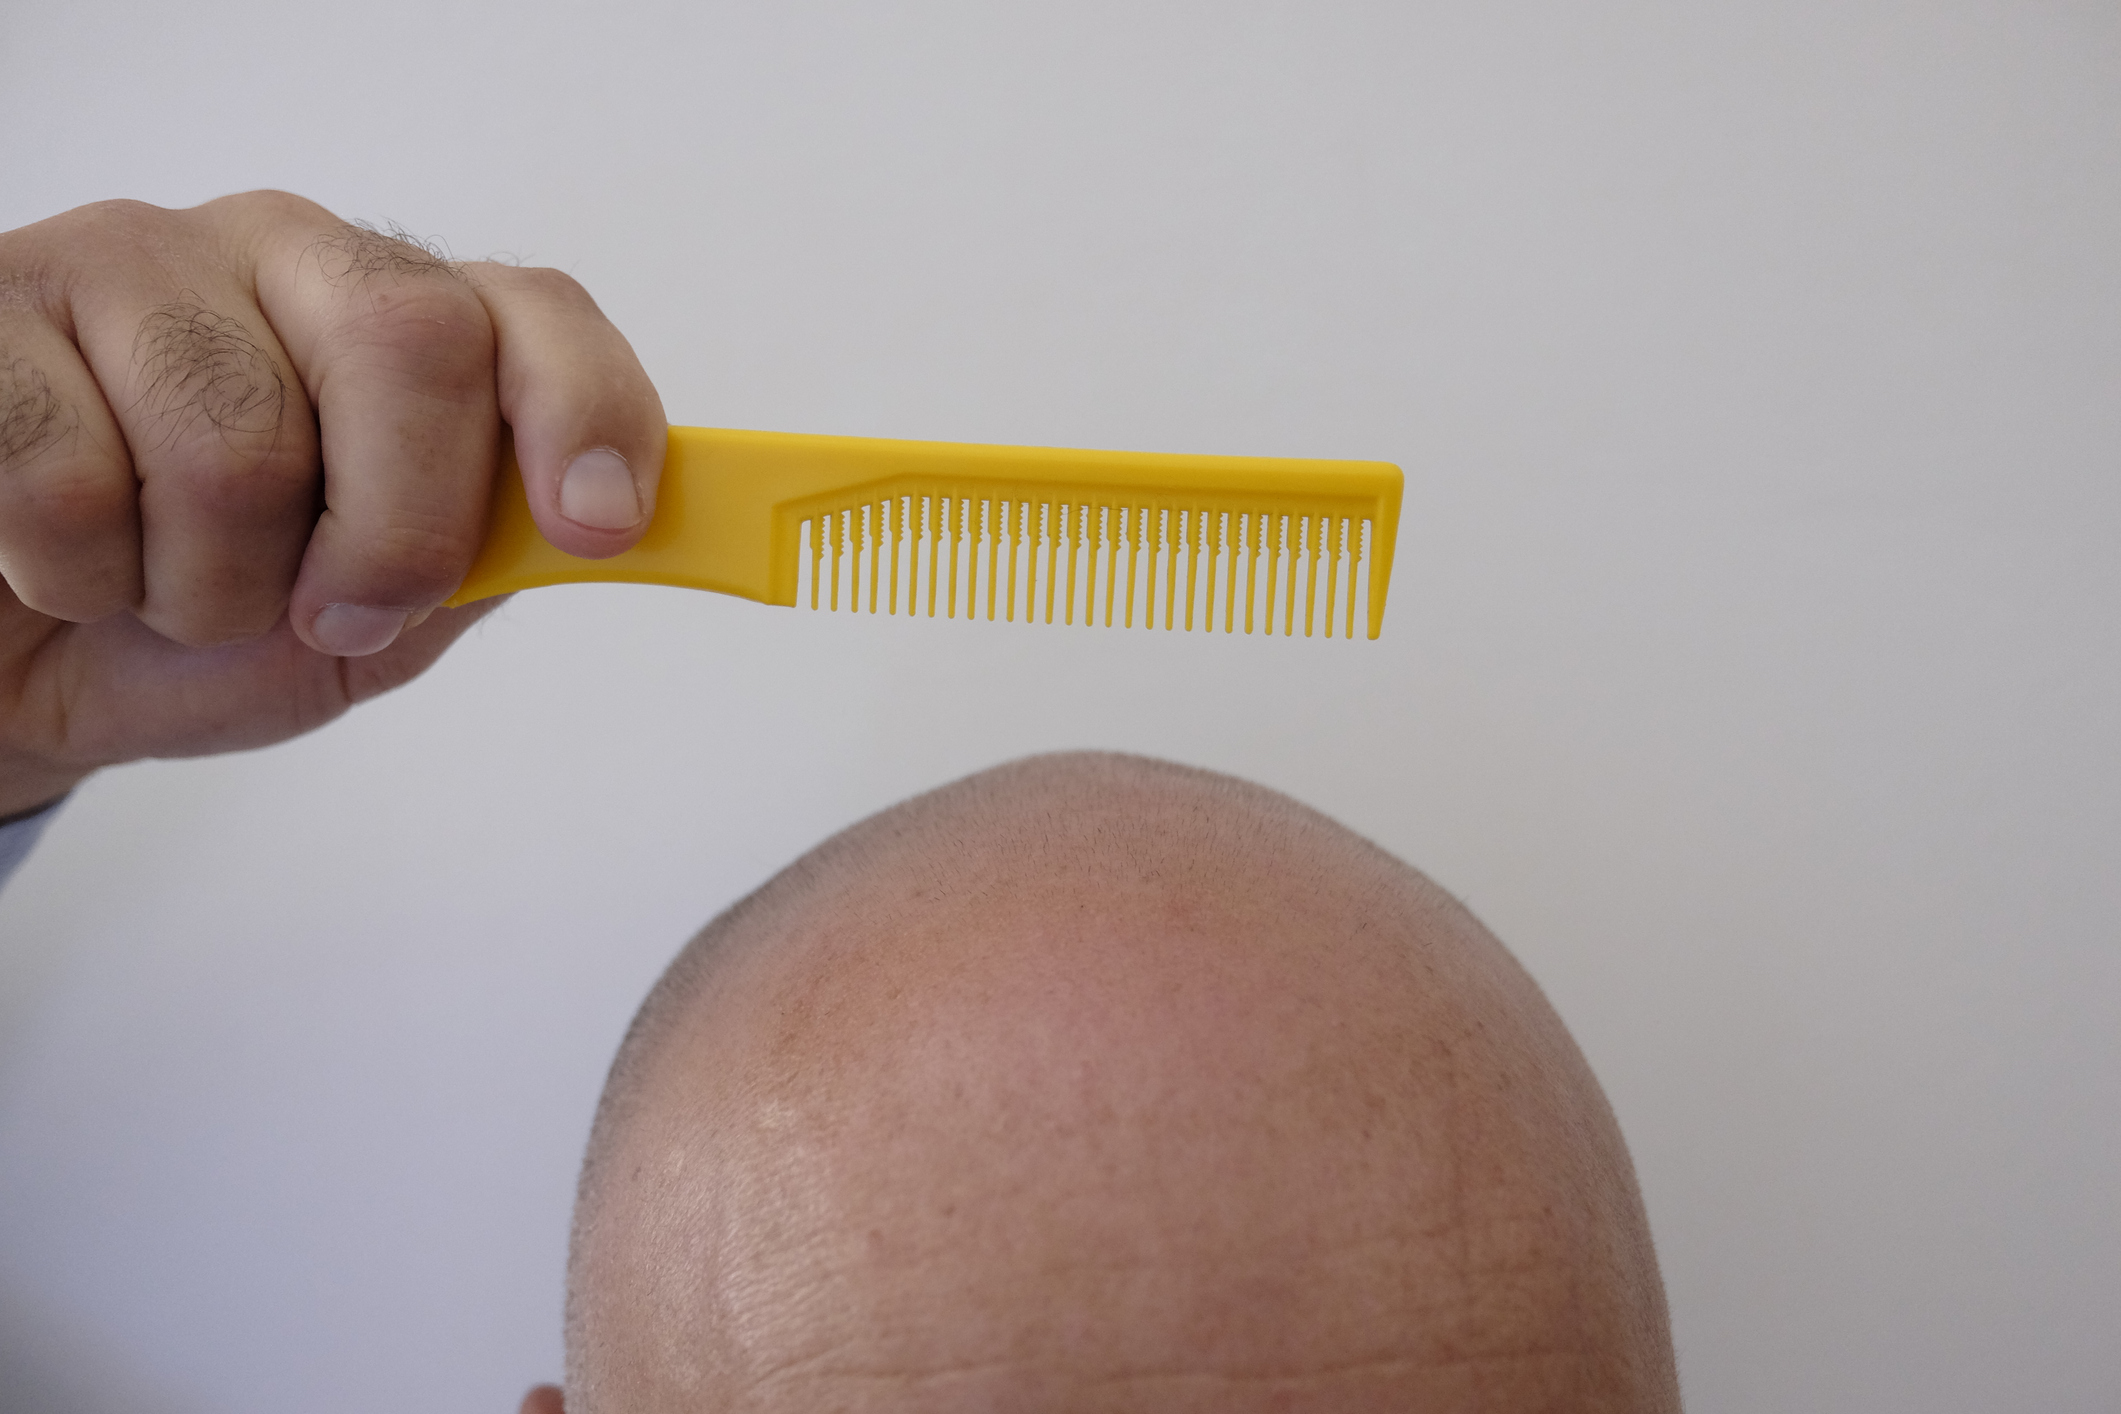 bald man with comb